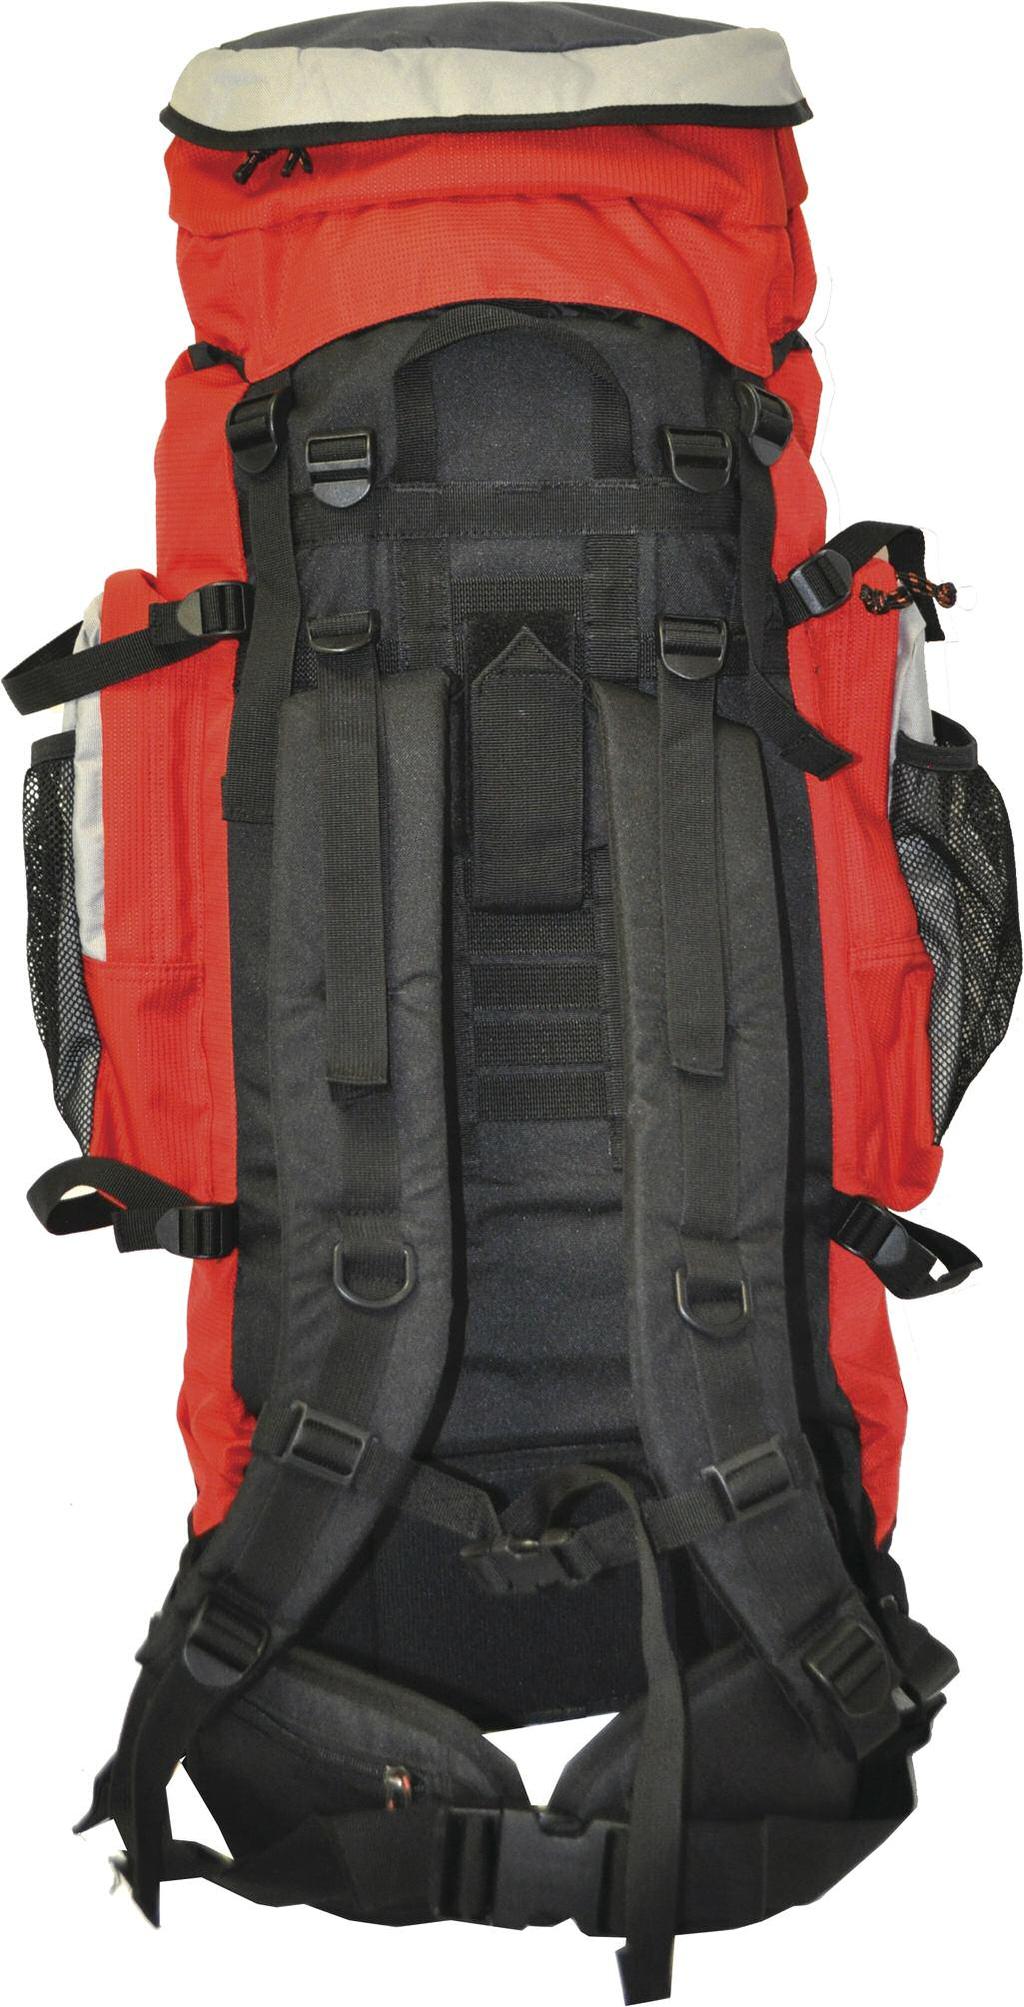 HIKING PACKS - INTERNAL FRAMES 8 Getaway A great value for those wanting to do a bit of everthing;